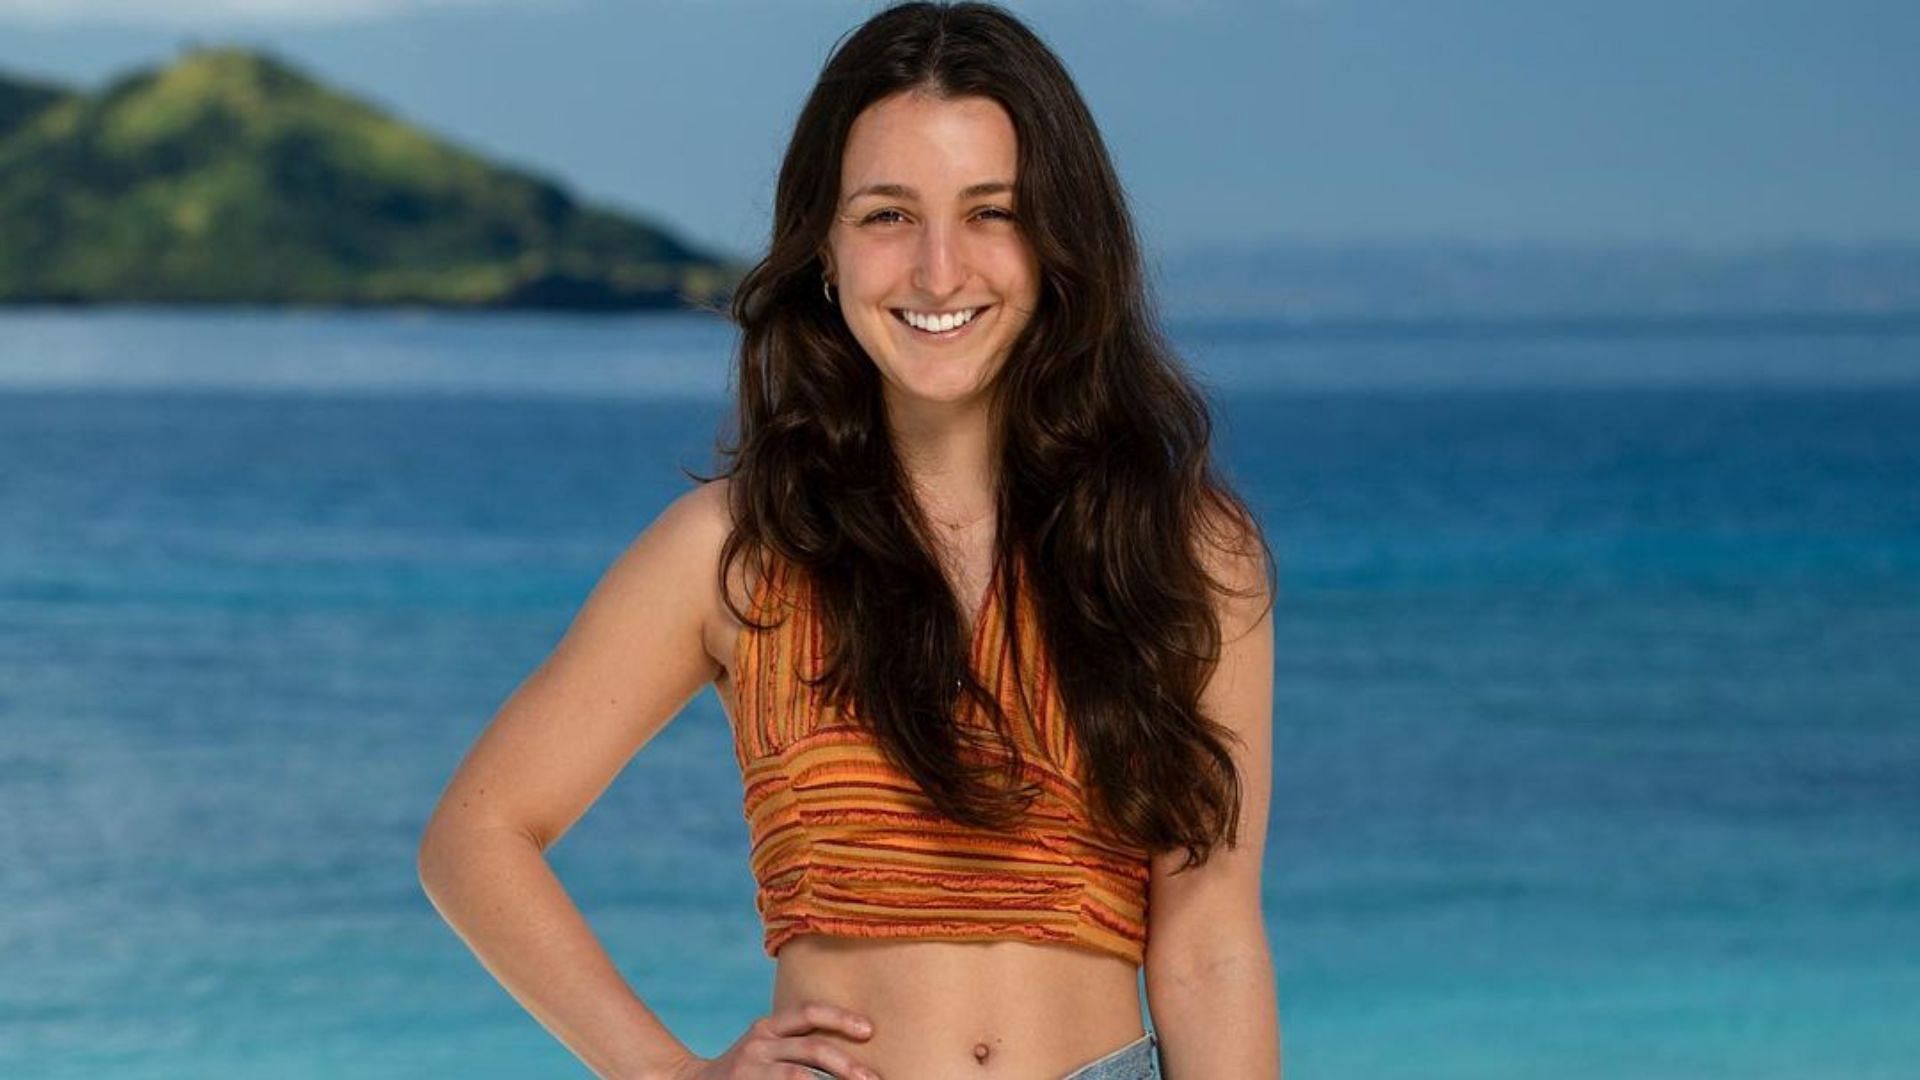 Who is Maddy Pomilla? Meet Survivor 44 contestant with interesting social media handles involving Jeff Probst